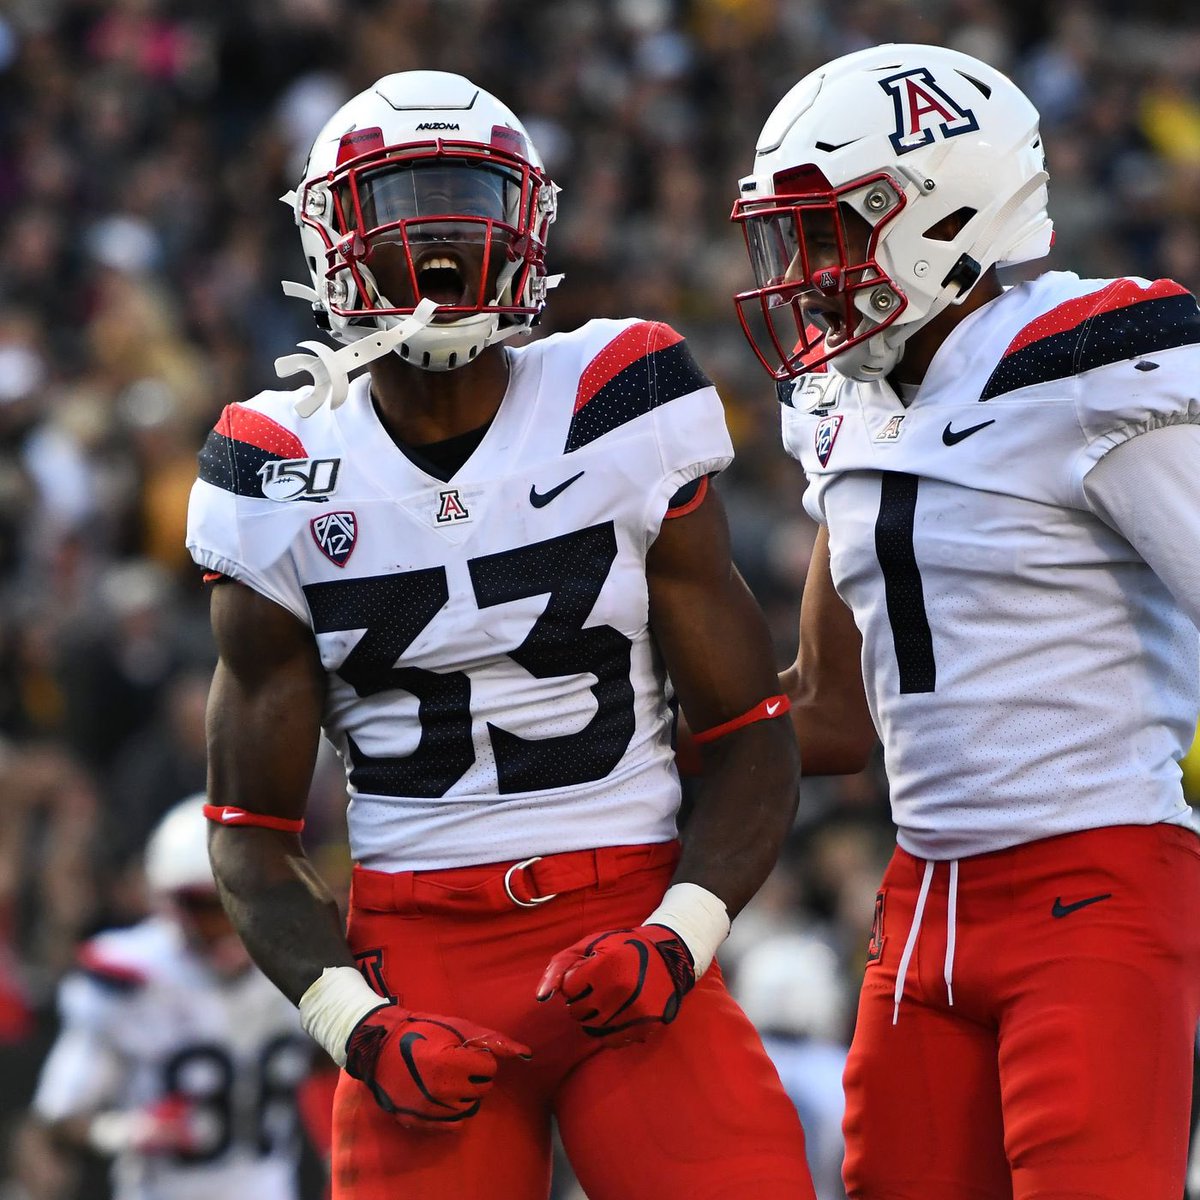 #AGTG After a great talk with @RealCoachCarter I’m super excited to announce I’ve earned an offer from the University of Arizona! #BearDown🐻⬇️